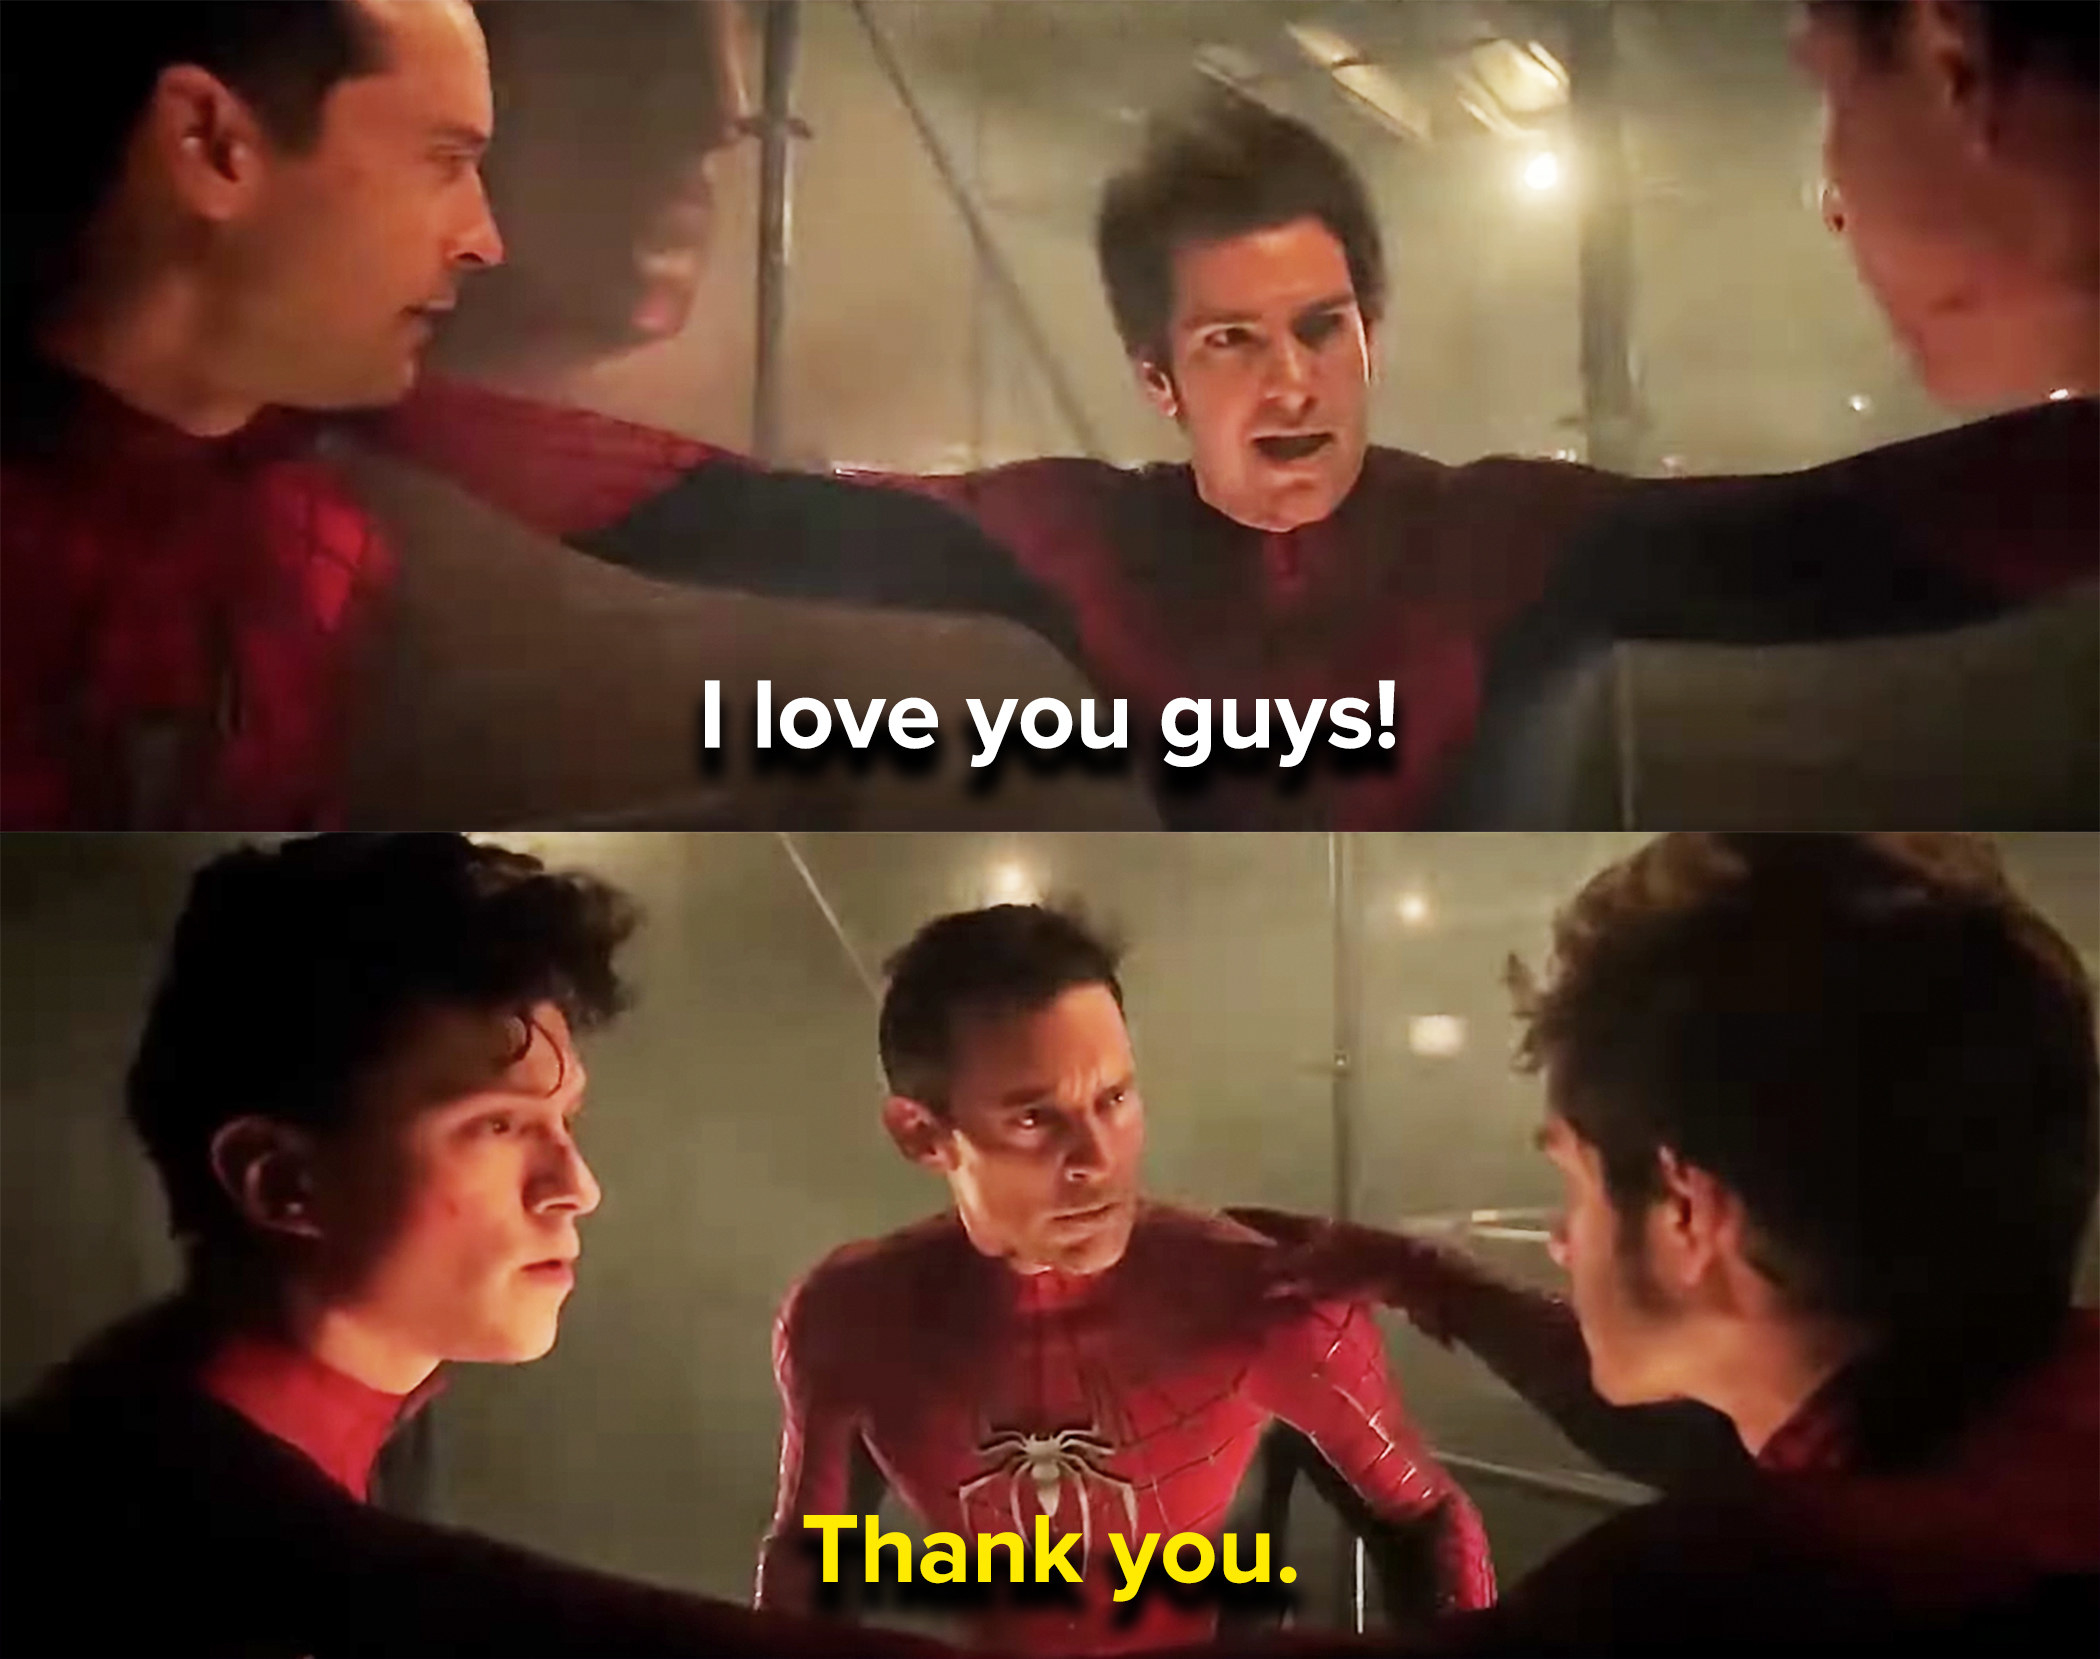 Andrew says he love them, and the other two Spideys say thank you